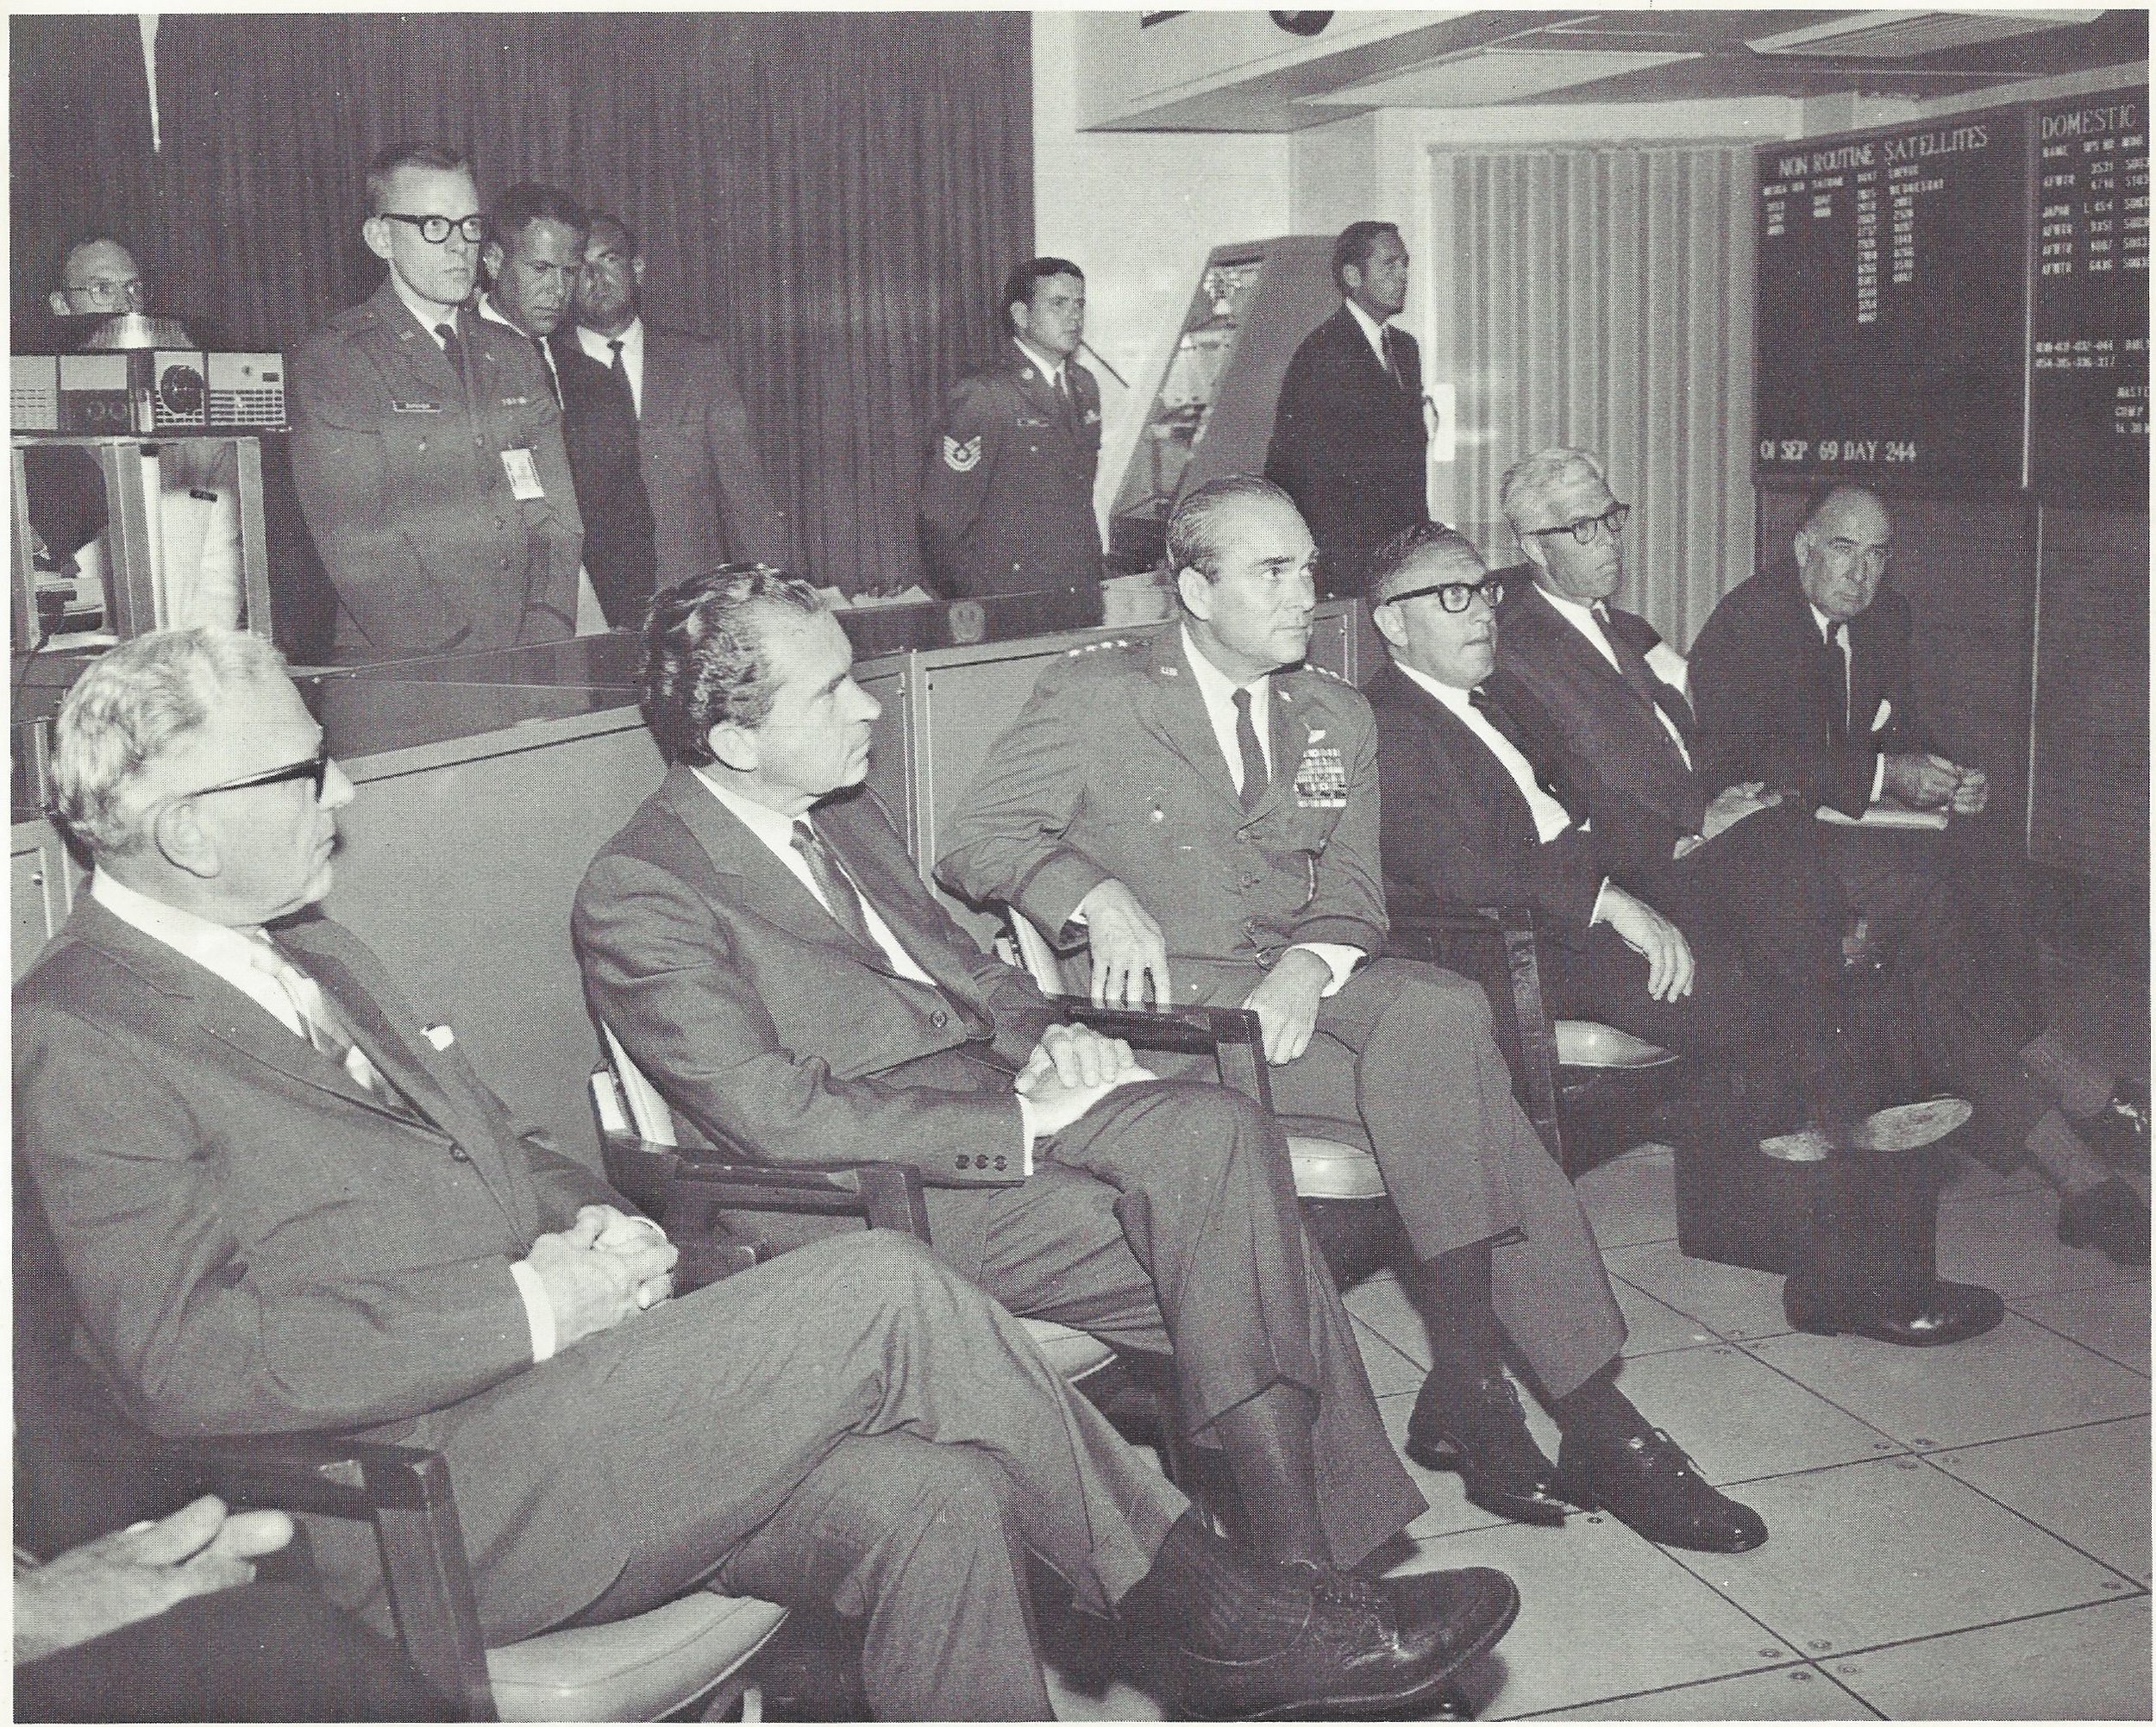  Caption: "DISTINGUISHED VISITORS - Richard M. Nixon is September 1969 became the first U.S. President to visit the underground command post of the North American Air Defense Command. He is shown here in NORAD's Space Defense Center being briefed by 